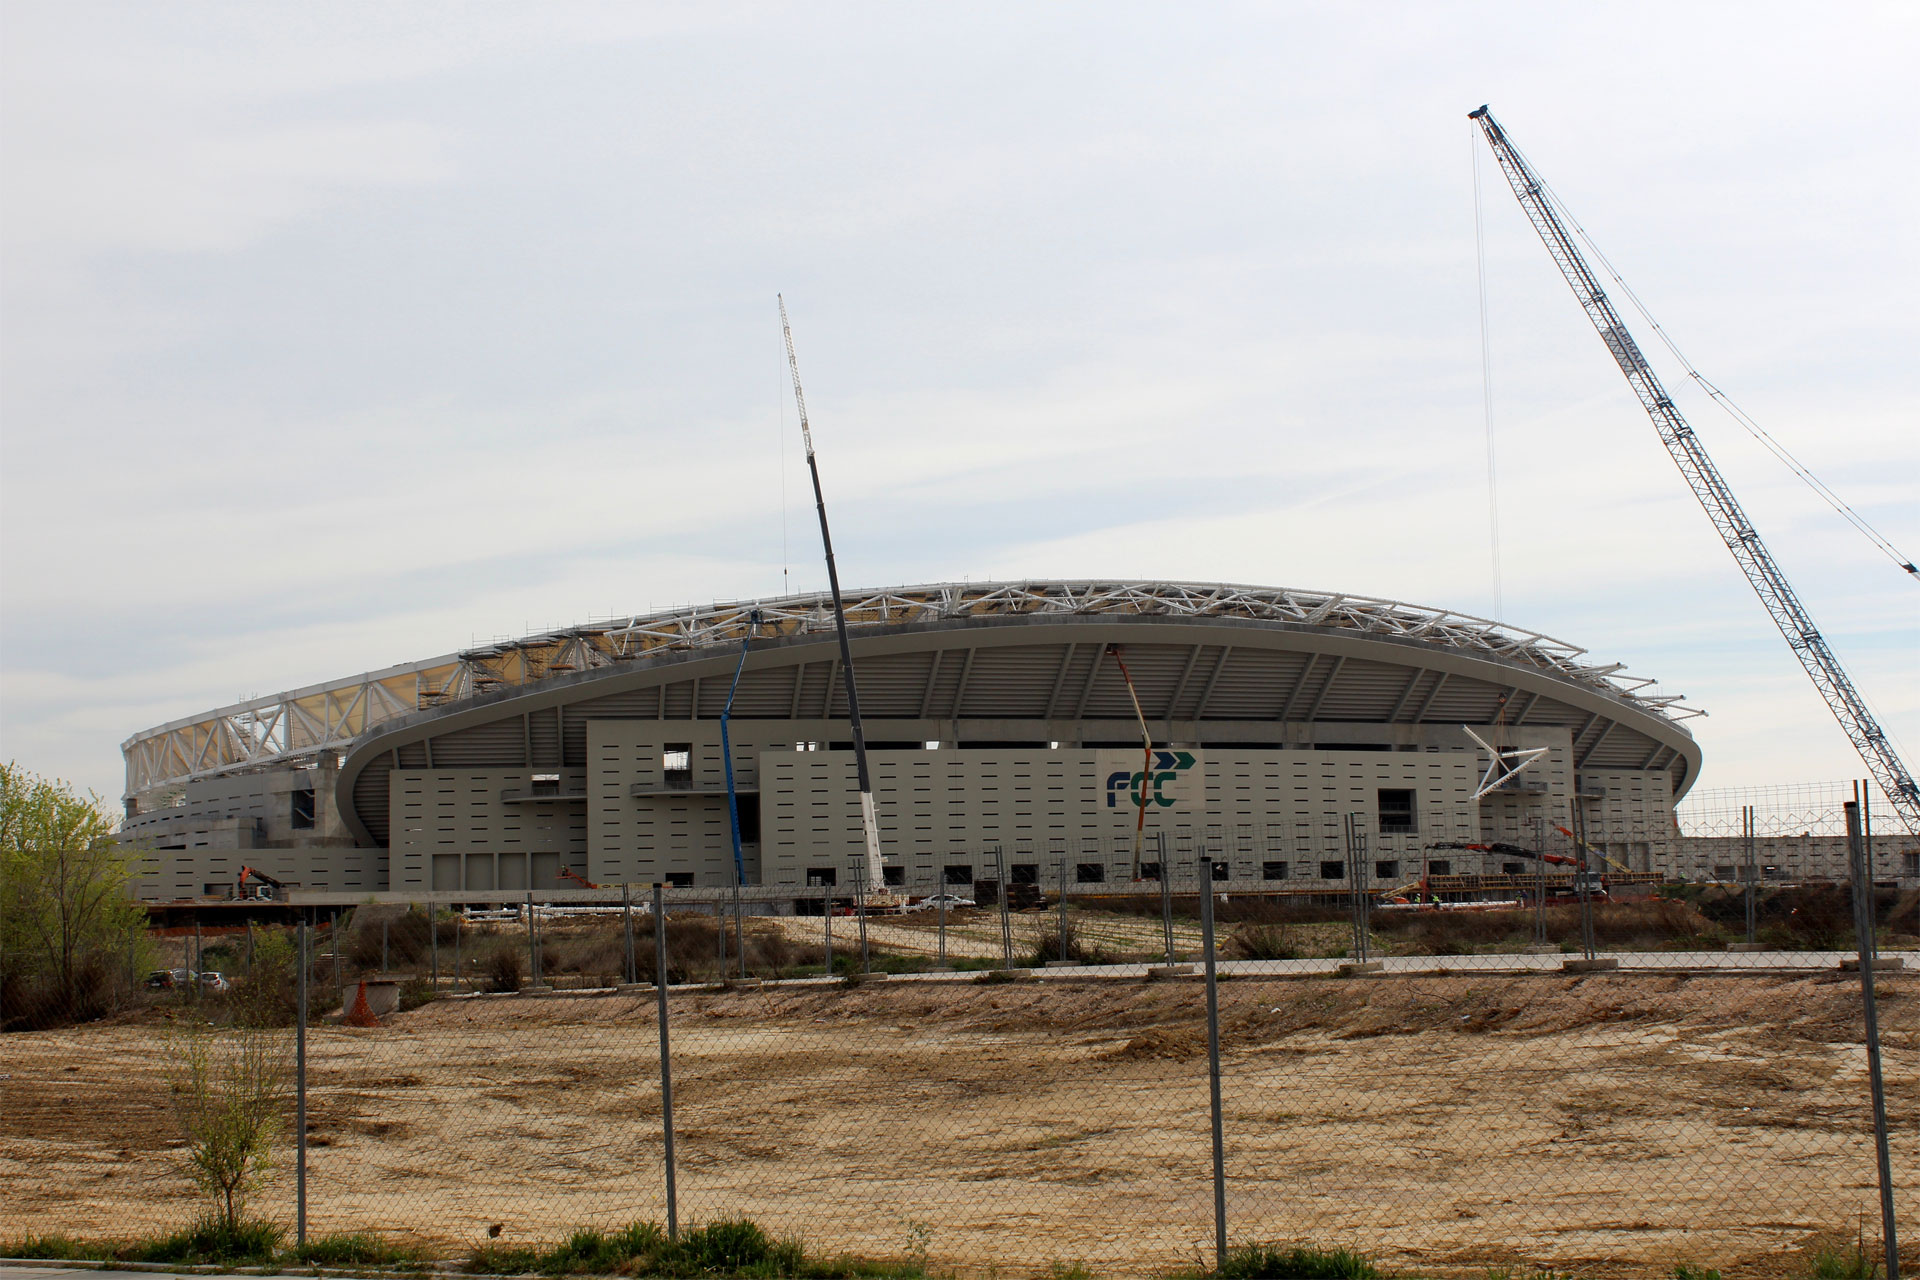 An under-construction stadium with scaffolding and an incomplete roof, a crane to the right, and a barren field leading to it